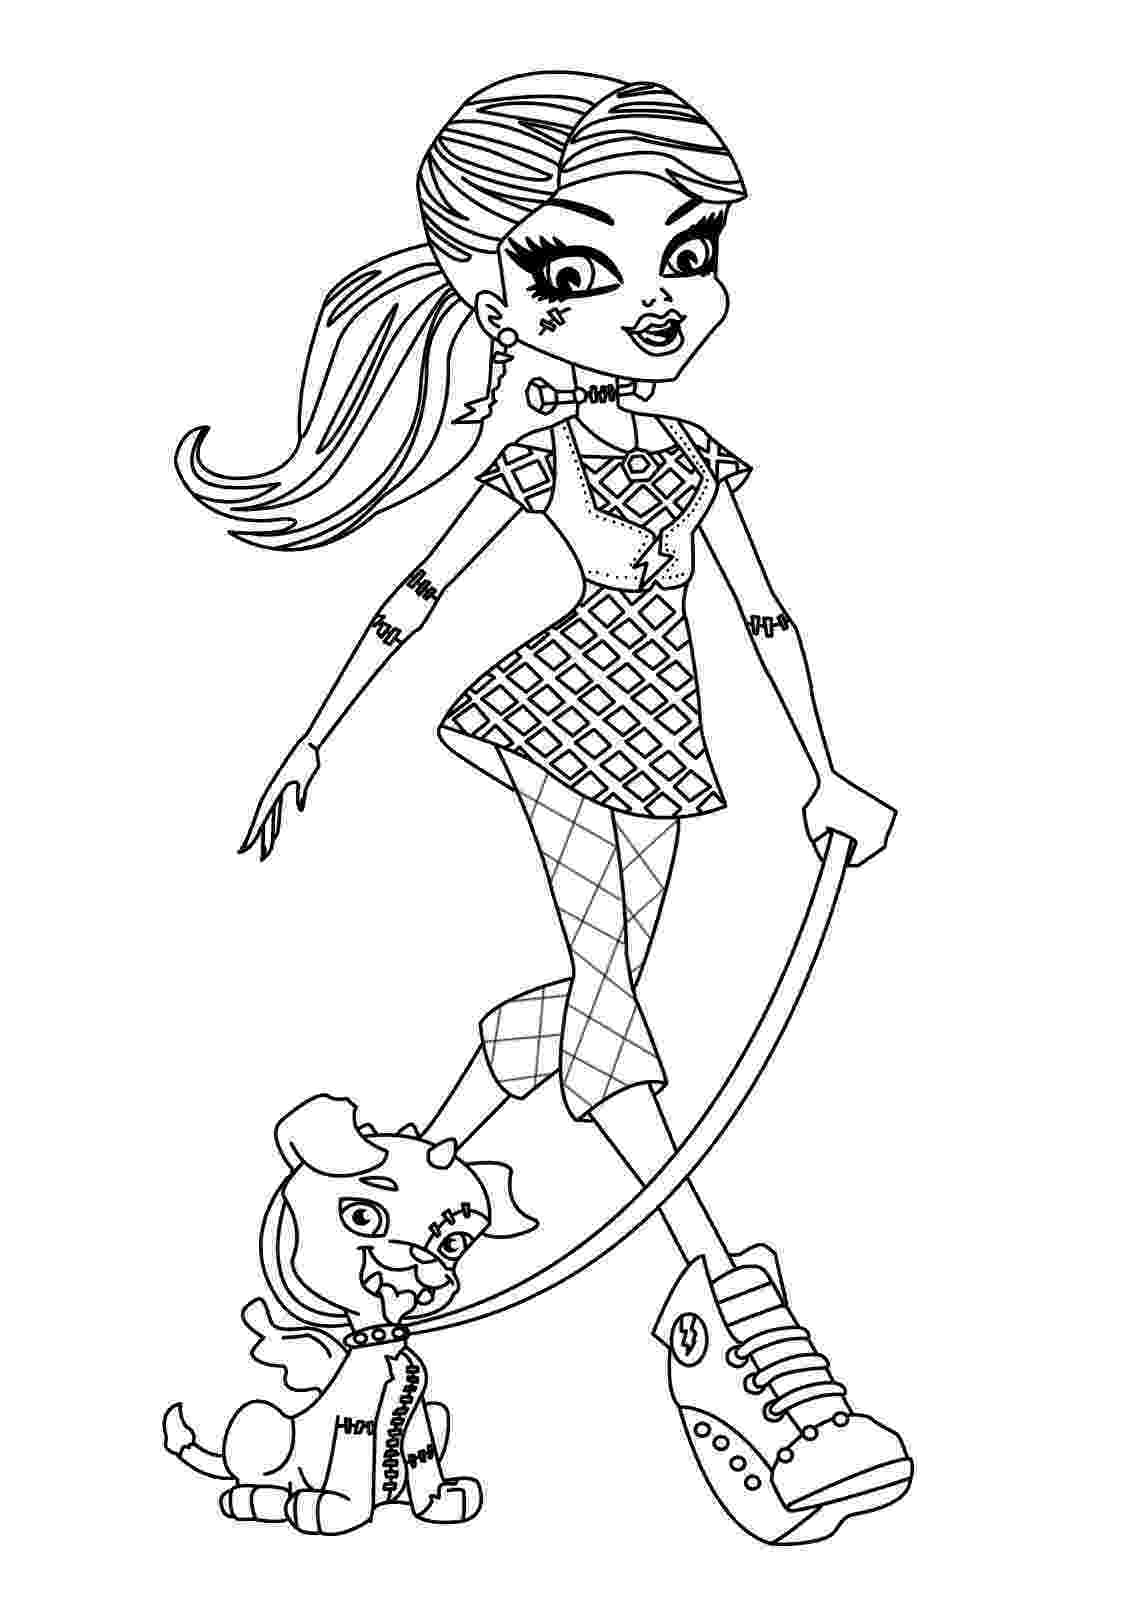 monster high black and white coloring pages purrsephone monster high coloring page monster high and high coloring pages monster black white 